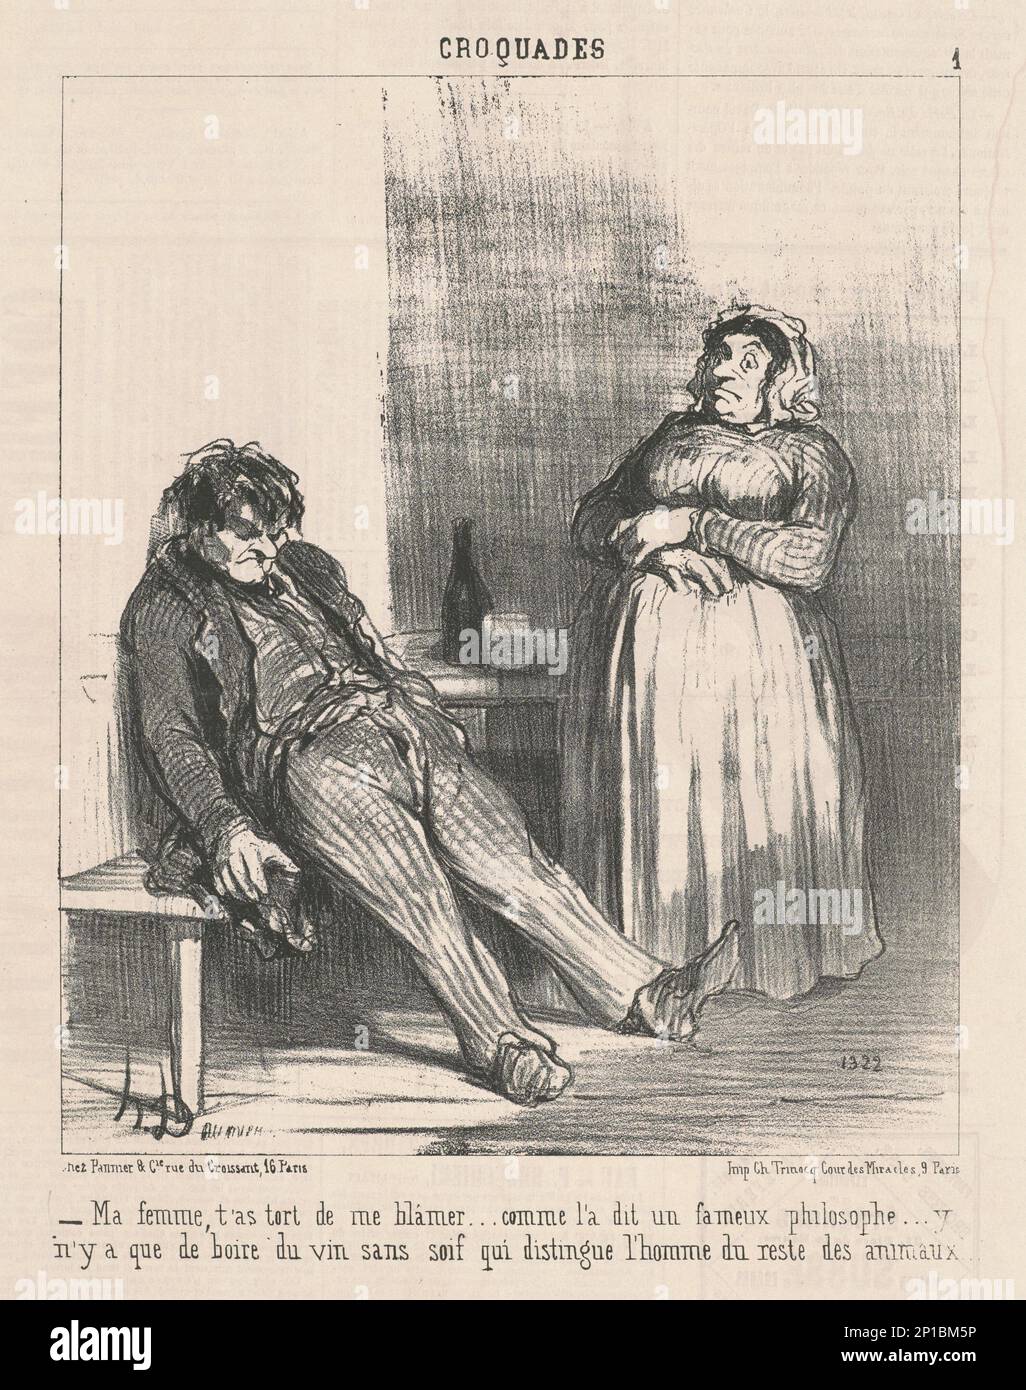 Ma femme, t'as tort de me blamer ..., 19th century. Wife, you are wrong to blame me...as a famous philosopher said...wine-drinking without thirst is the only thing that distinguishes man from the rest of the animals. Stock Photo